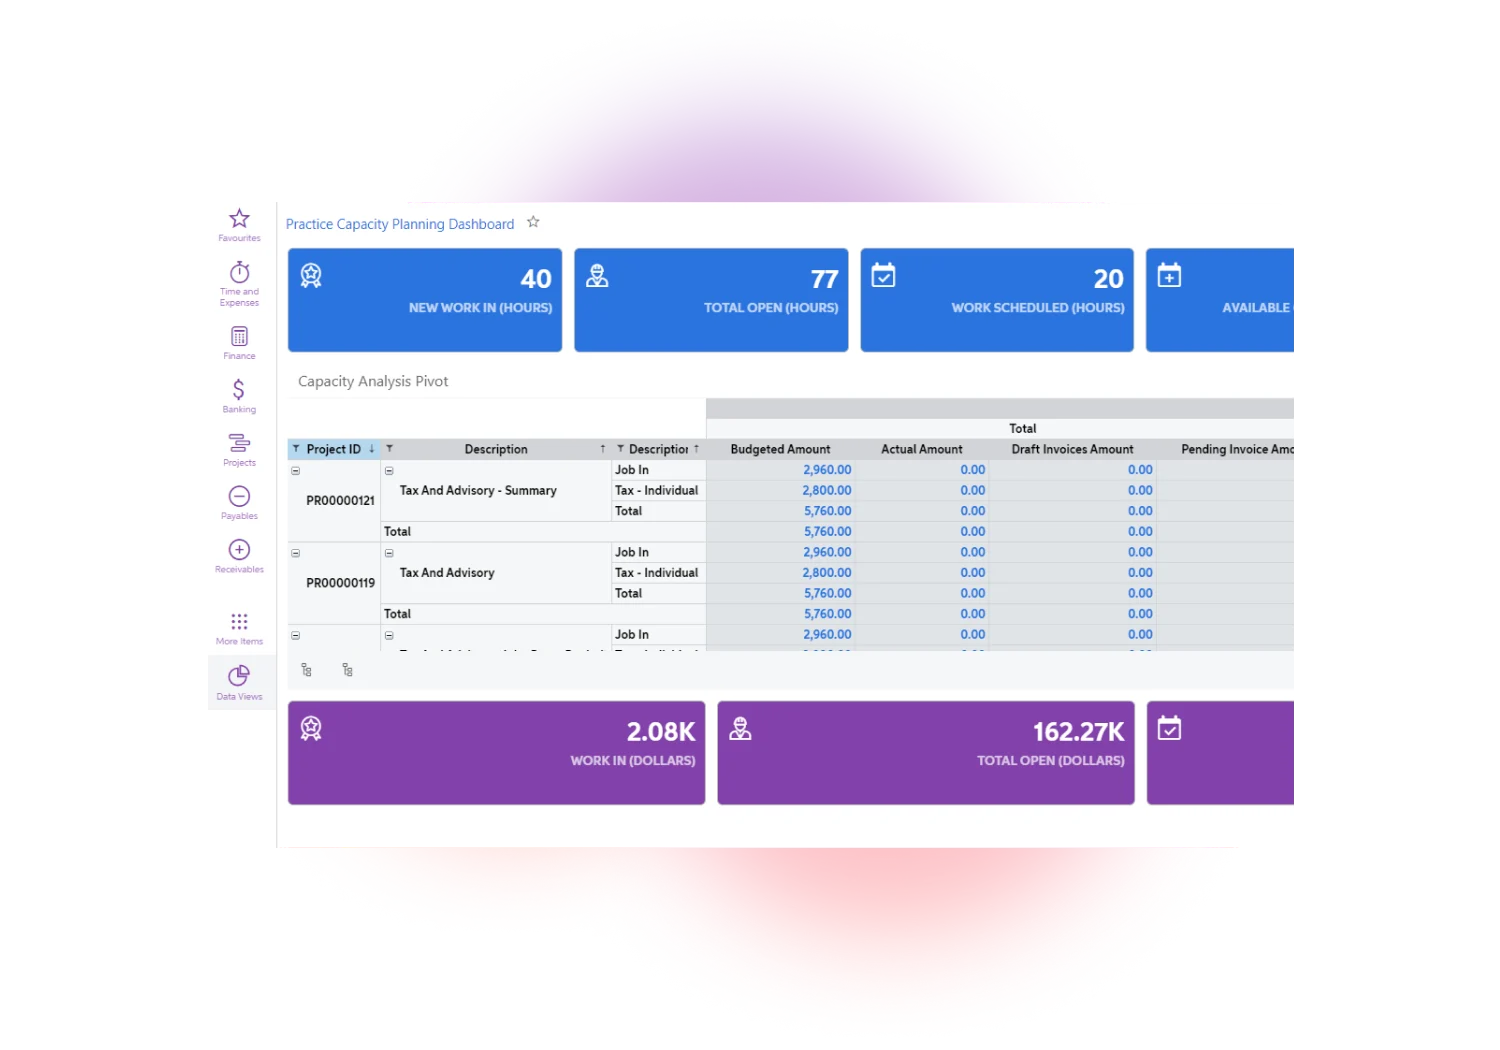 A screenshot of MYOB Advanced Professional Services, showing the Practice Capacity Planning Dashboard, with Capacity Analysis Pivot in focus. 